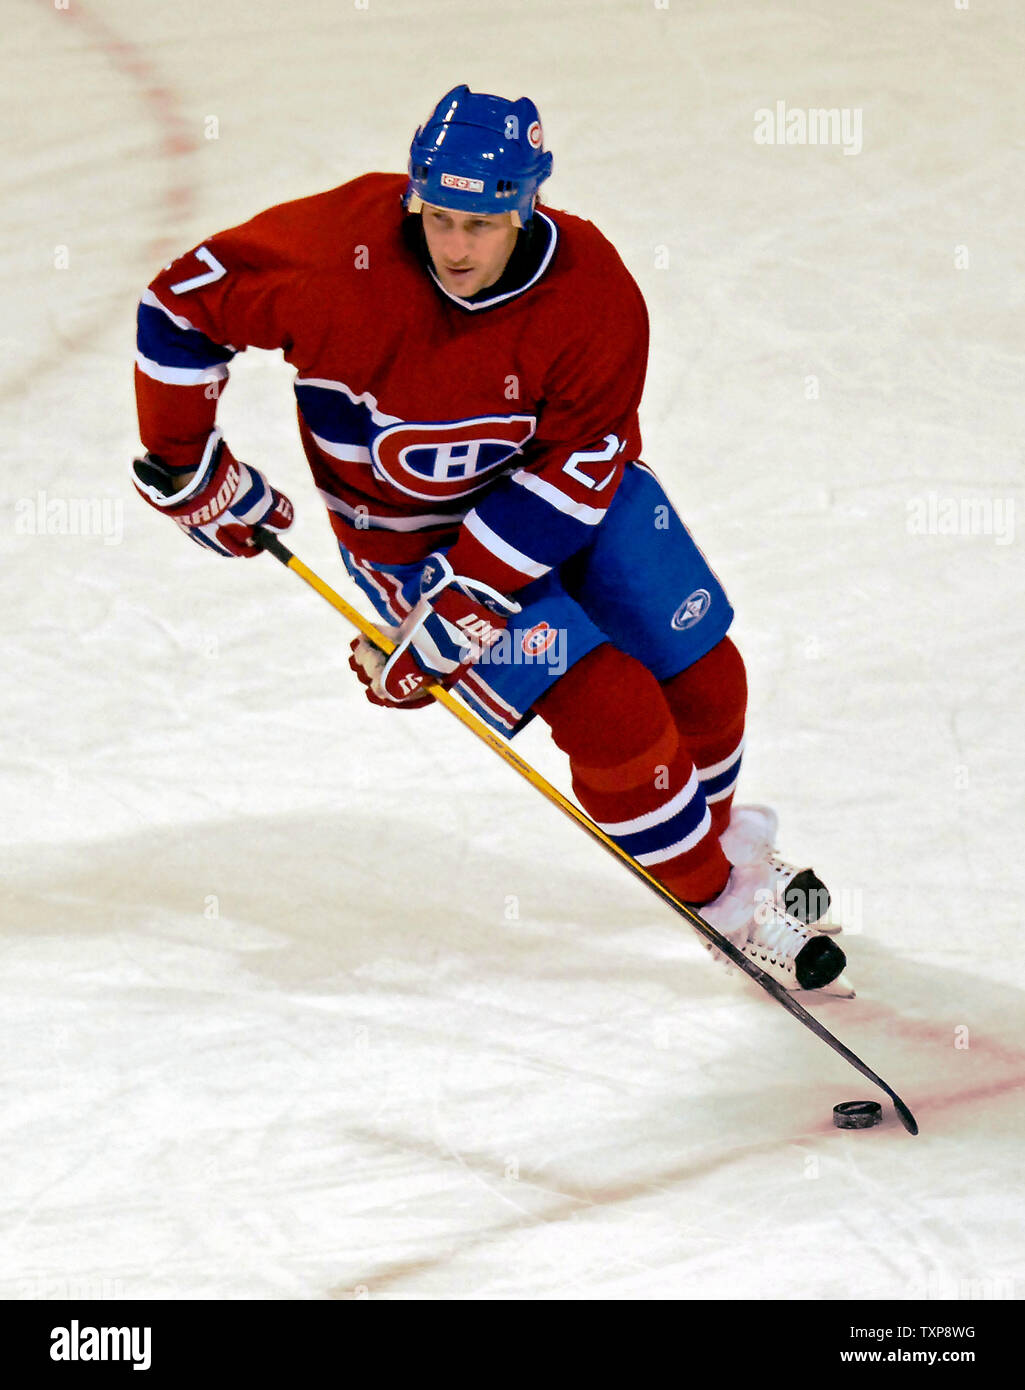 Montreal Canadiens right wing forward Alexei Kovalev (27) starts a play from his own end against the New York Islanders in the third period at the Bell Centre in Montreal, Canada on February 3, 2007. The Islanders defeated the Canadiens 4-2. (UPI Photo/Ed Wolfstein) Stock Photo